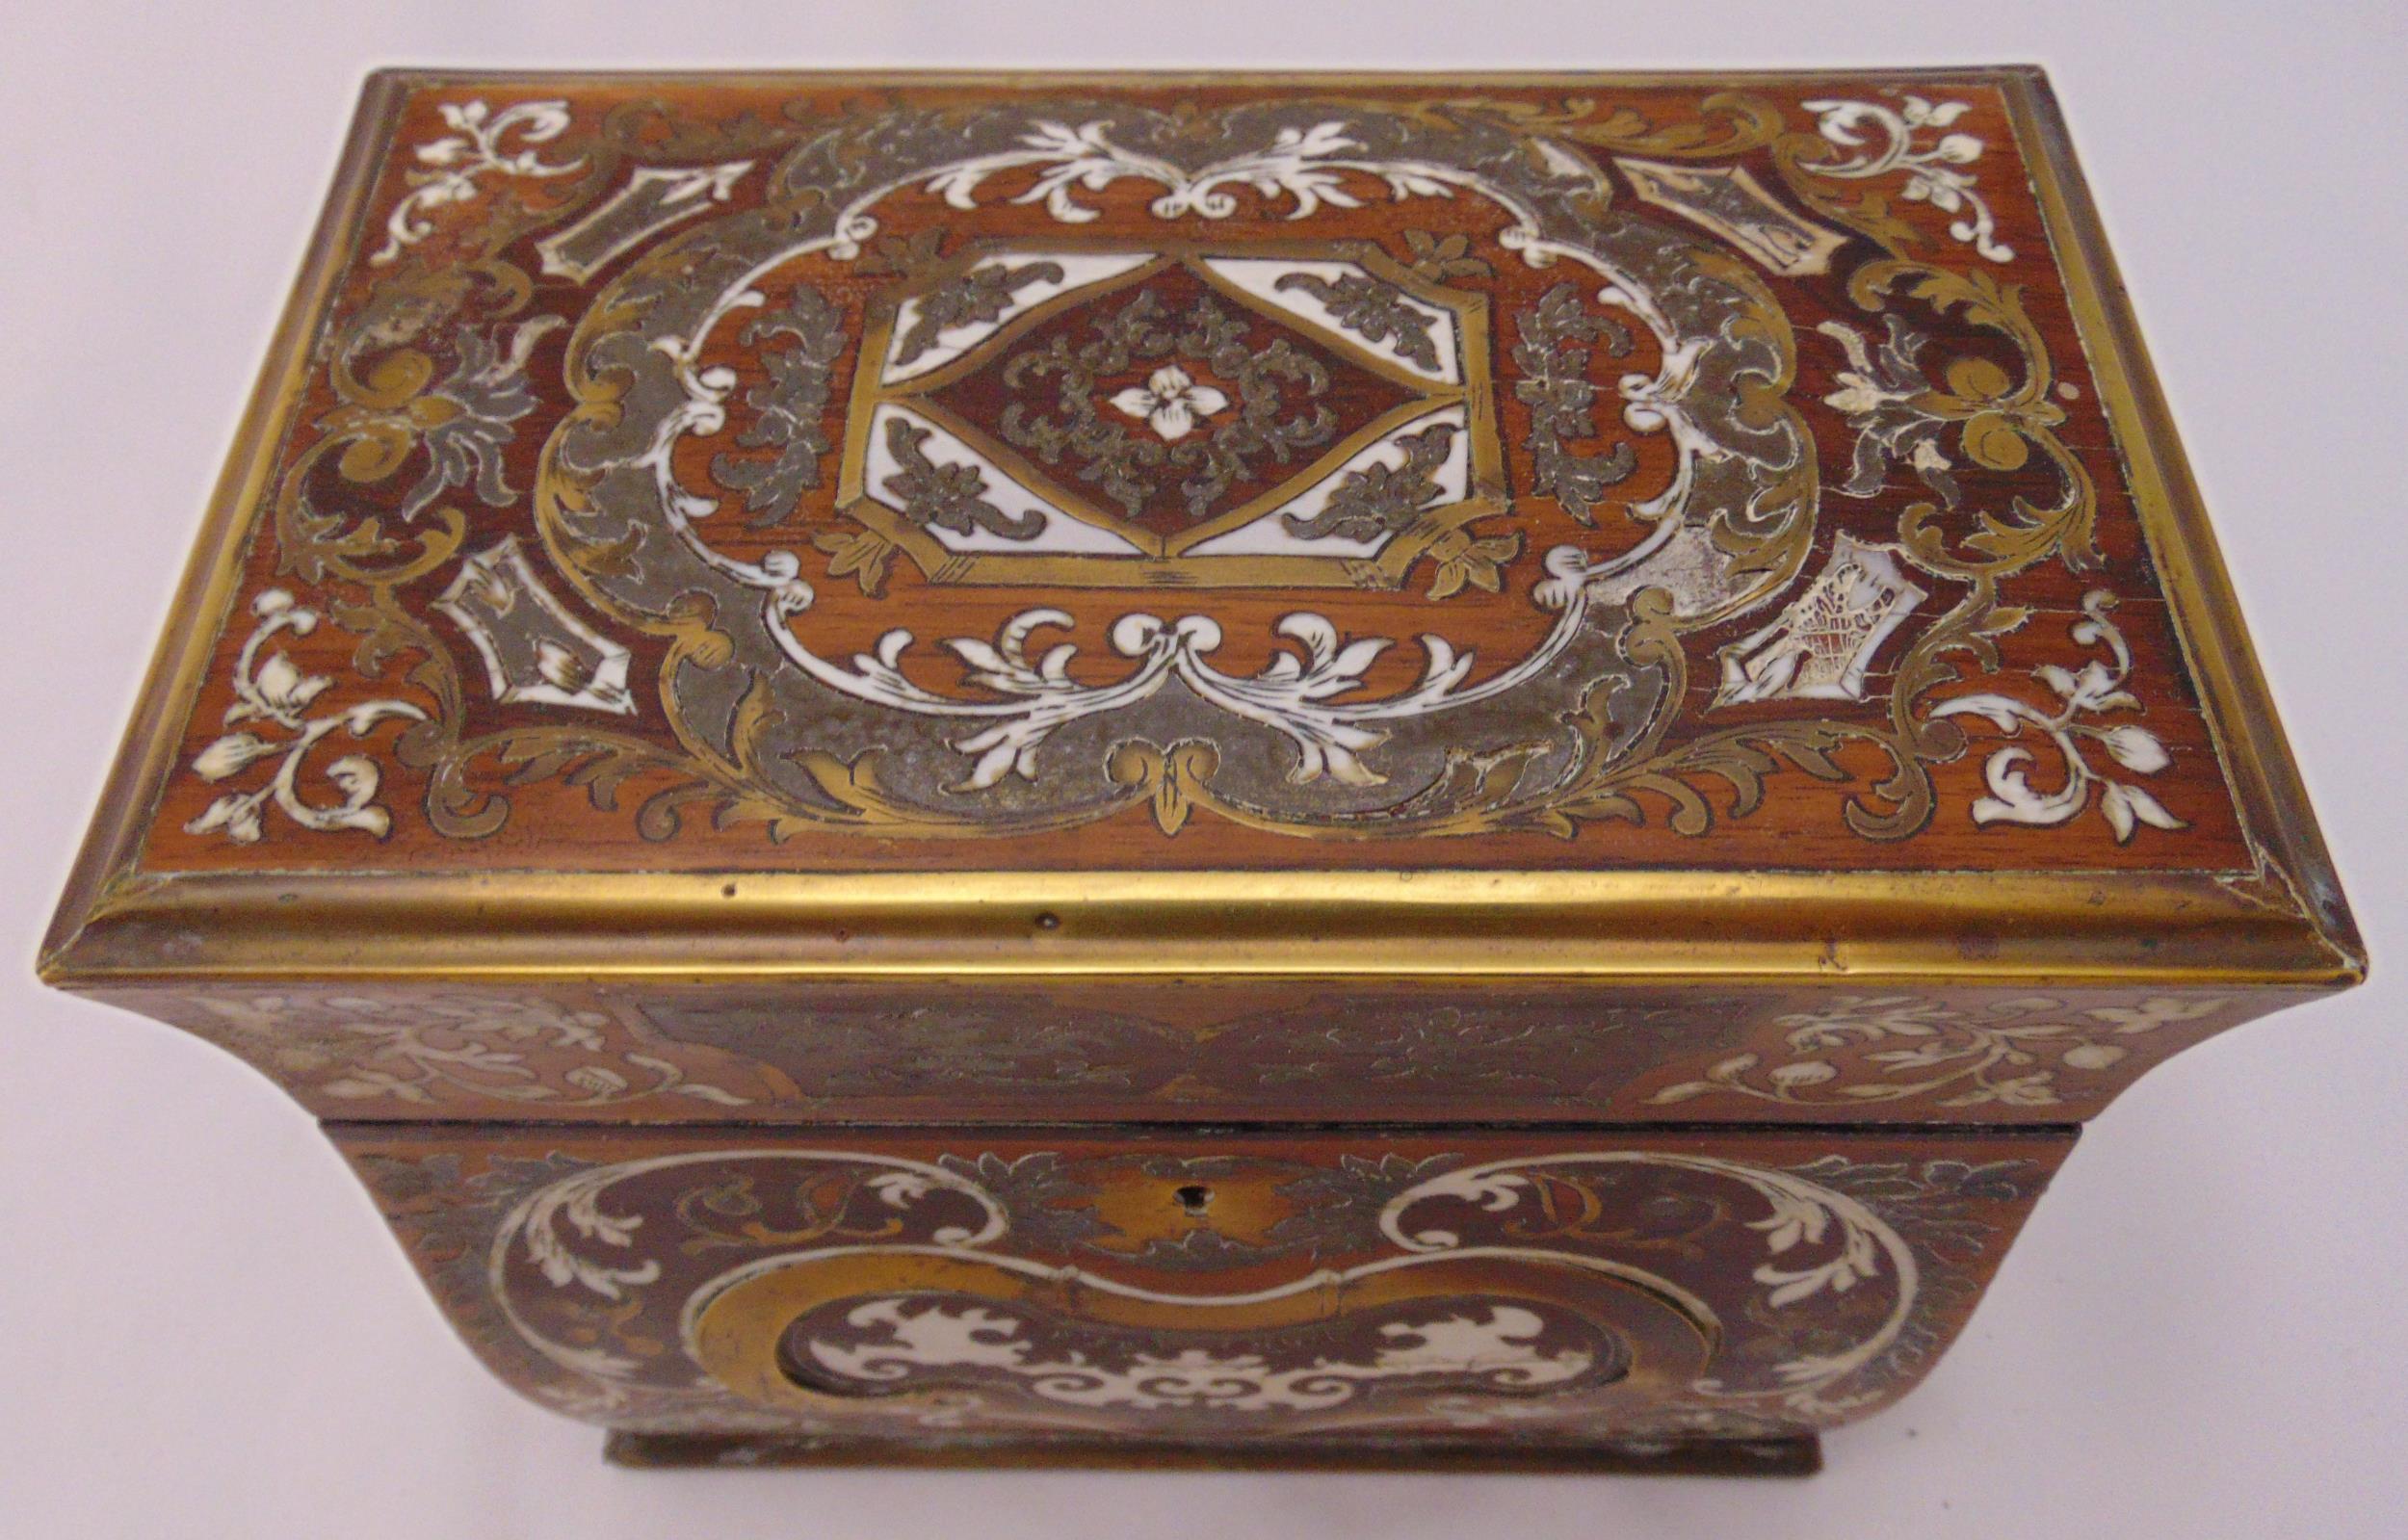 A French inlaid rectangular casket with hinged cover revealing lead lined interior, circa 1850, 14 x